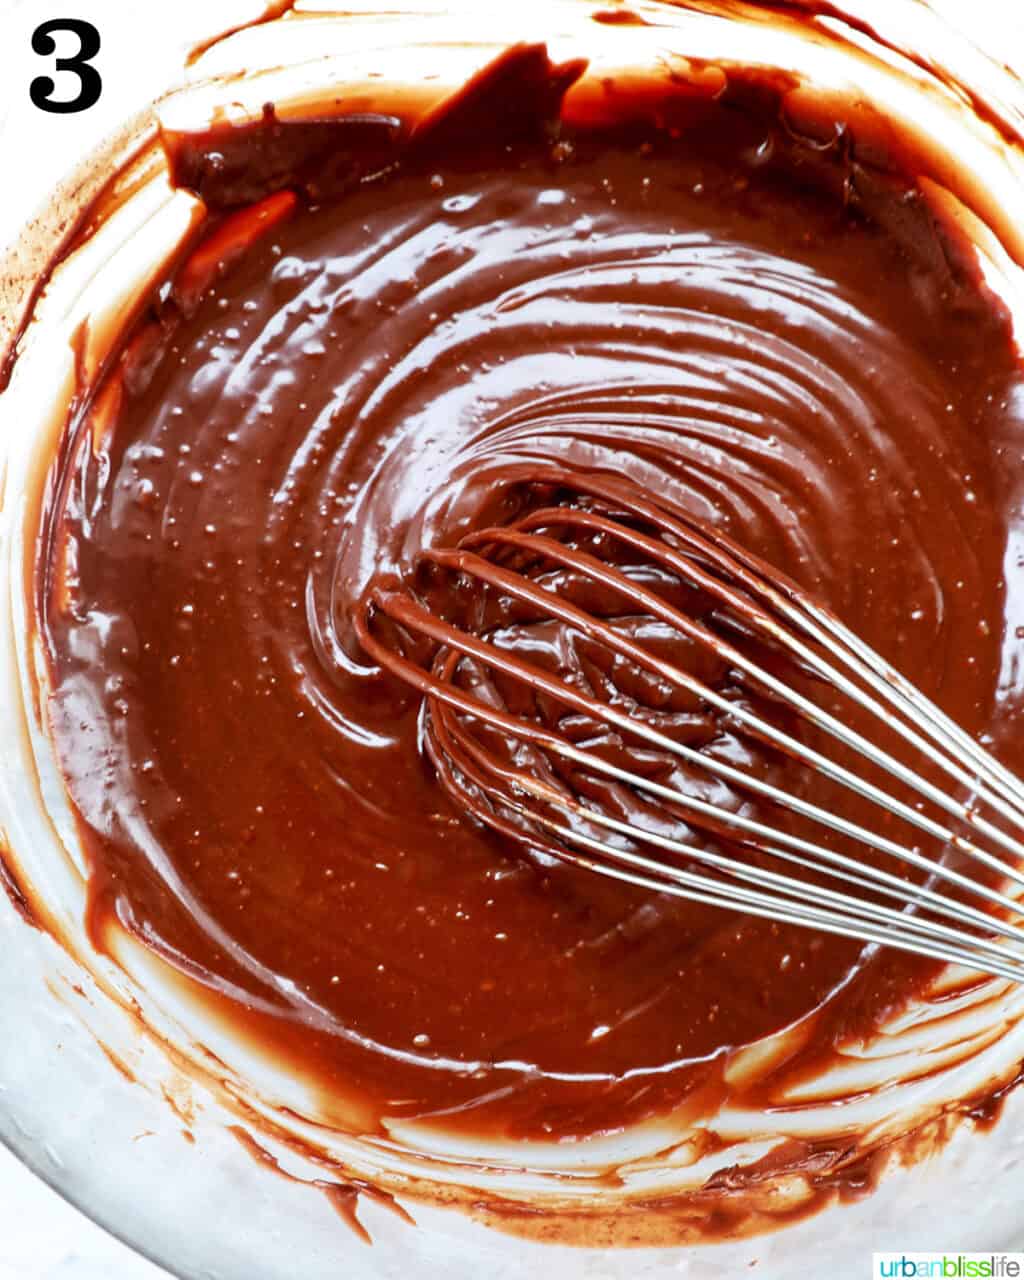 whisk with chocolate ganache in a bowl.